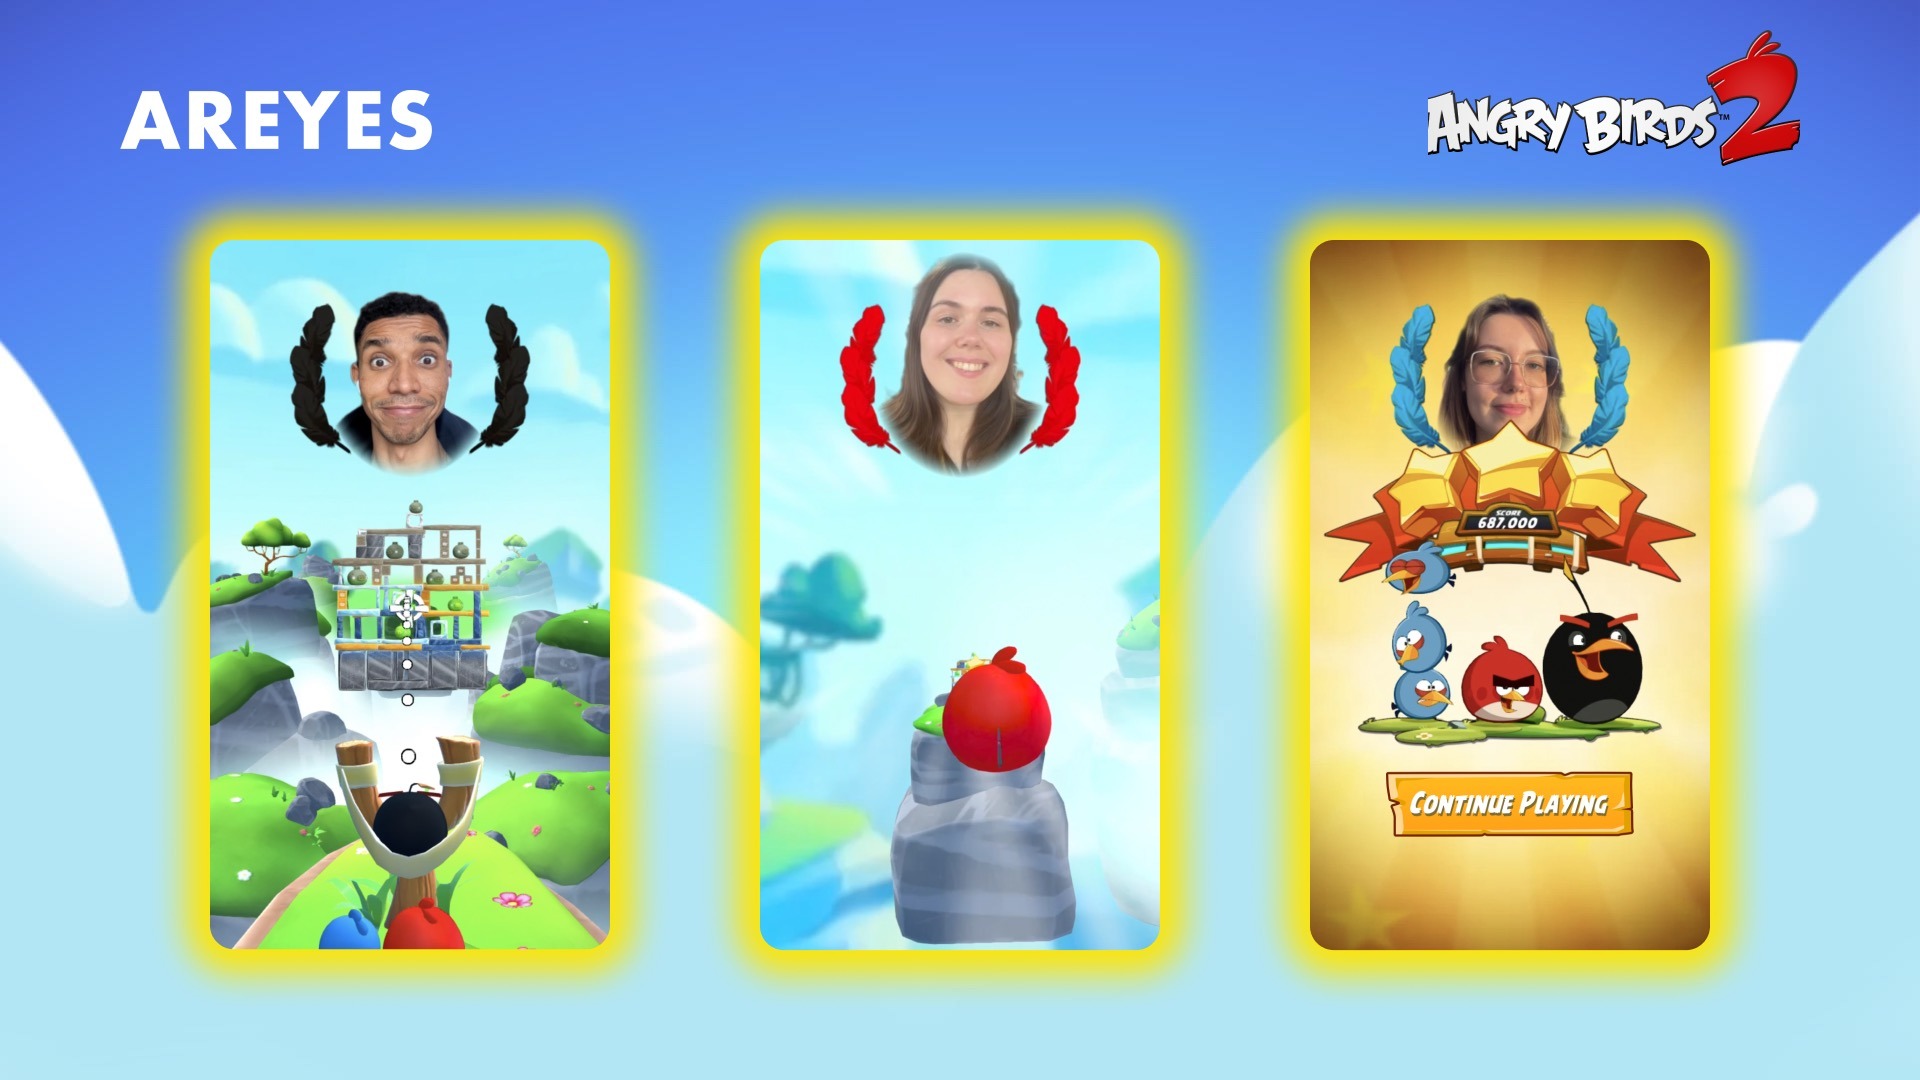 Angry Birds launches immersive flight mode in AR